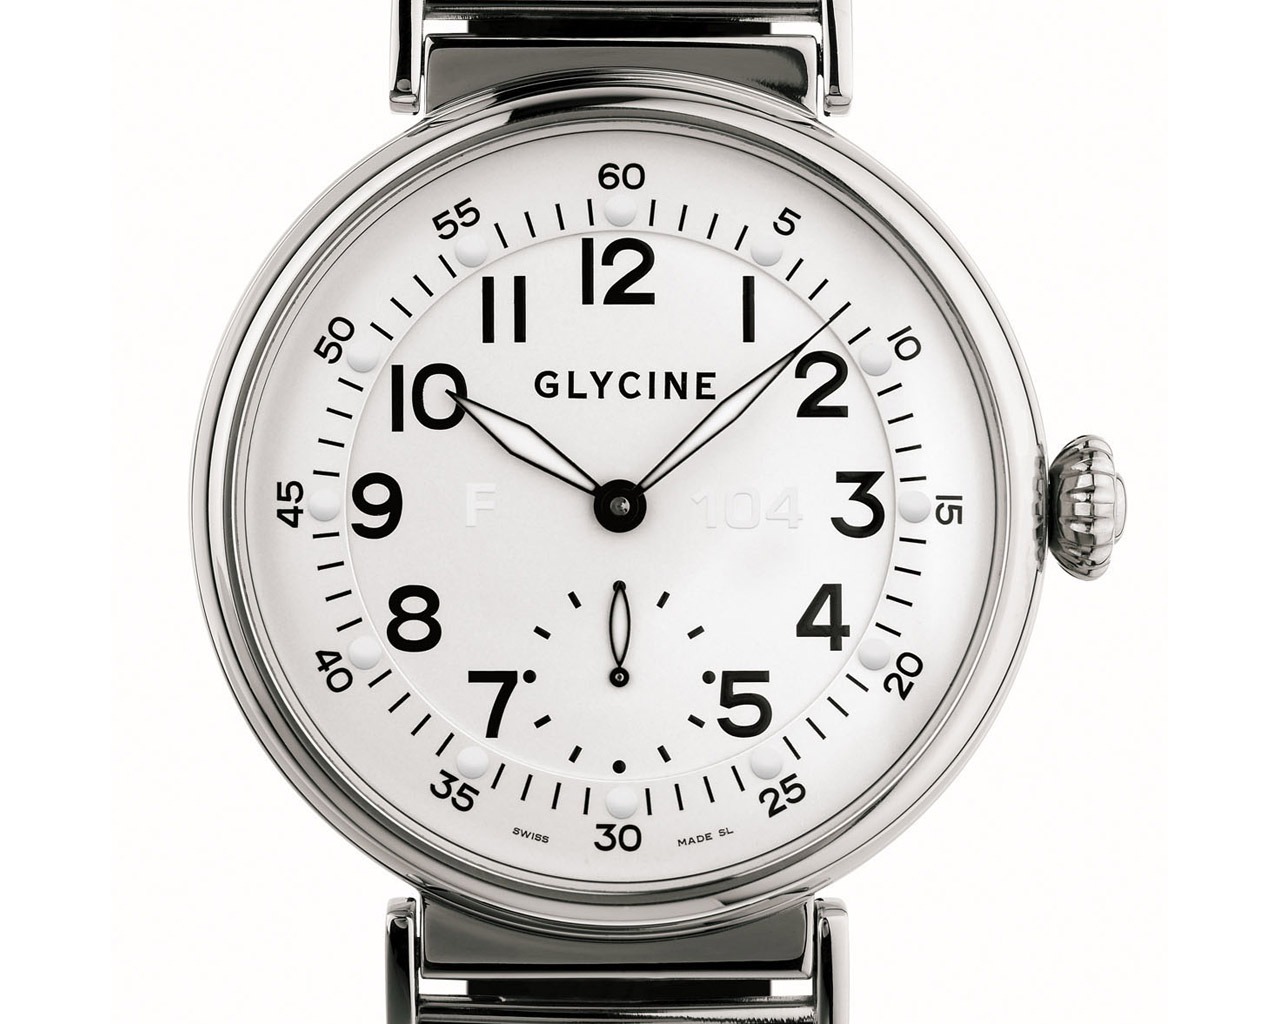 GLYCINE watches Advertising Wallpapers #9 - 1280x1024